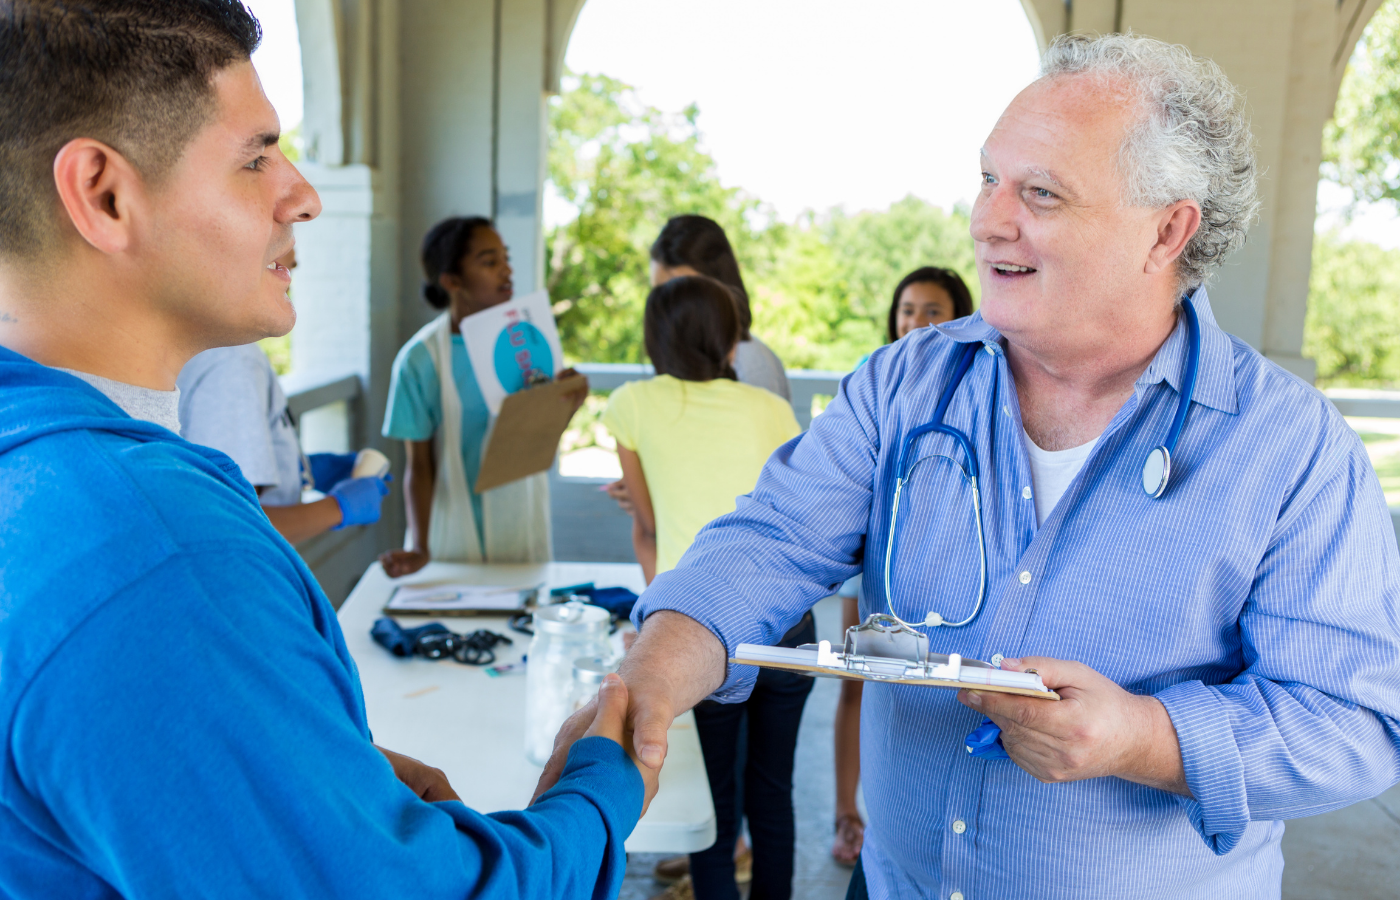 Provider shaking patient's hand at our Summer Health Fair